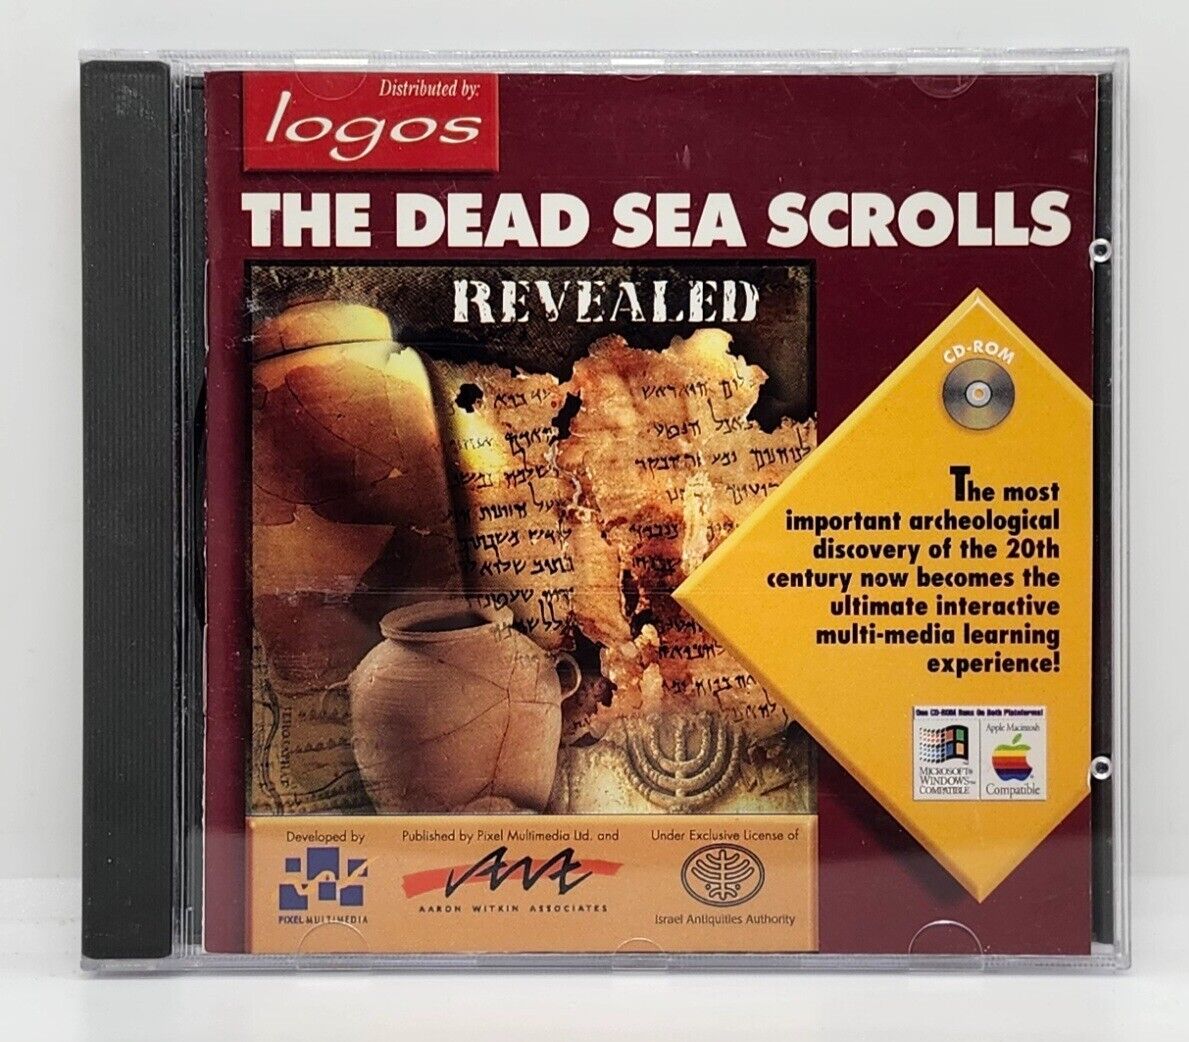 THE DEAD SEA SCROLLS REVEALED (1994 CD-ROM) LOGOS ~ ARCHEOLOGICAL DISCOVERY 